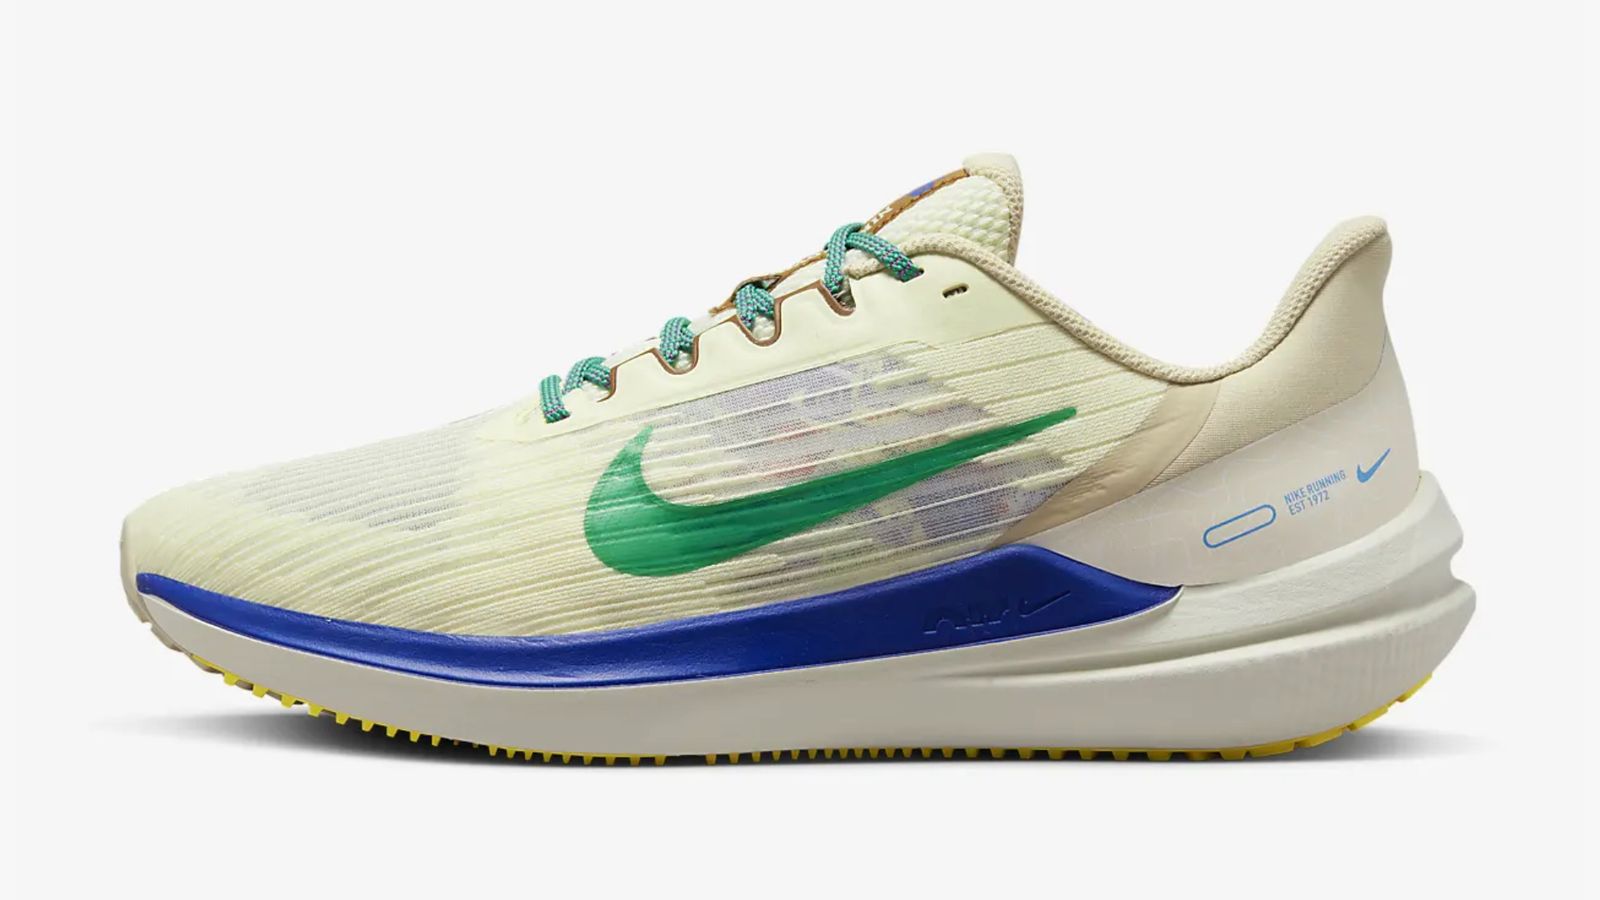 Nike Winflo 9 product image of a coconut milk and light sand running shoe with green and blue details.